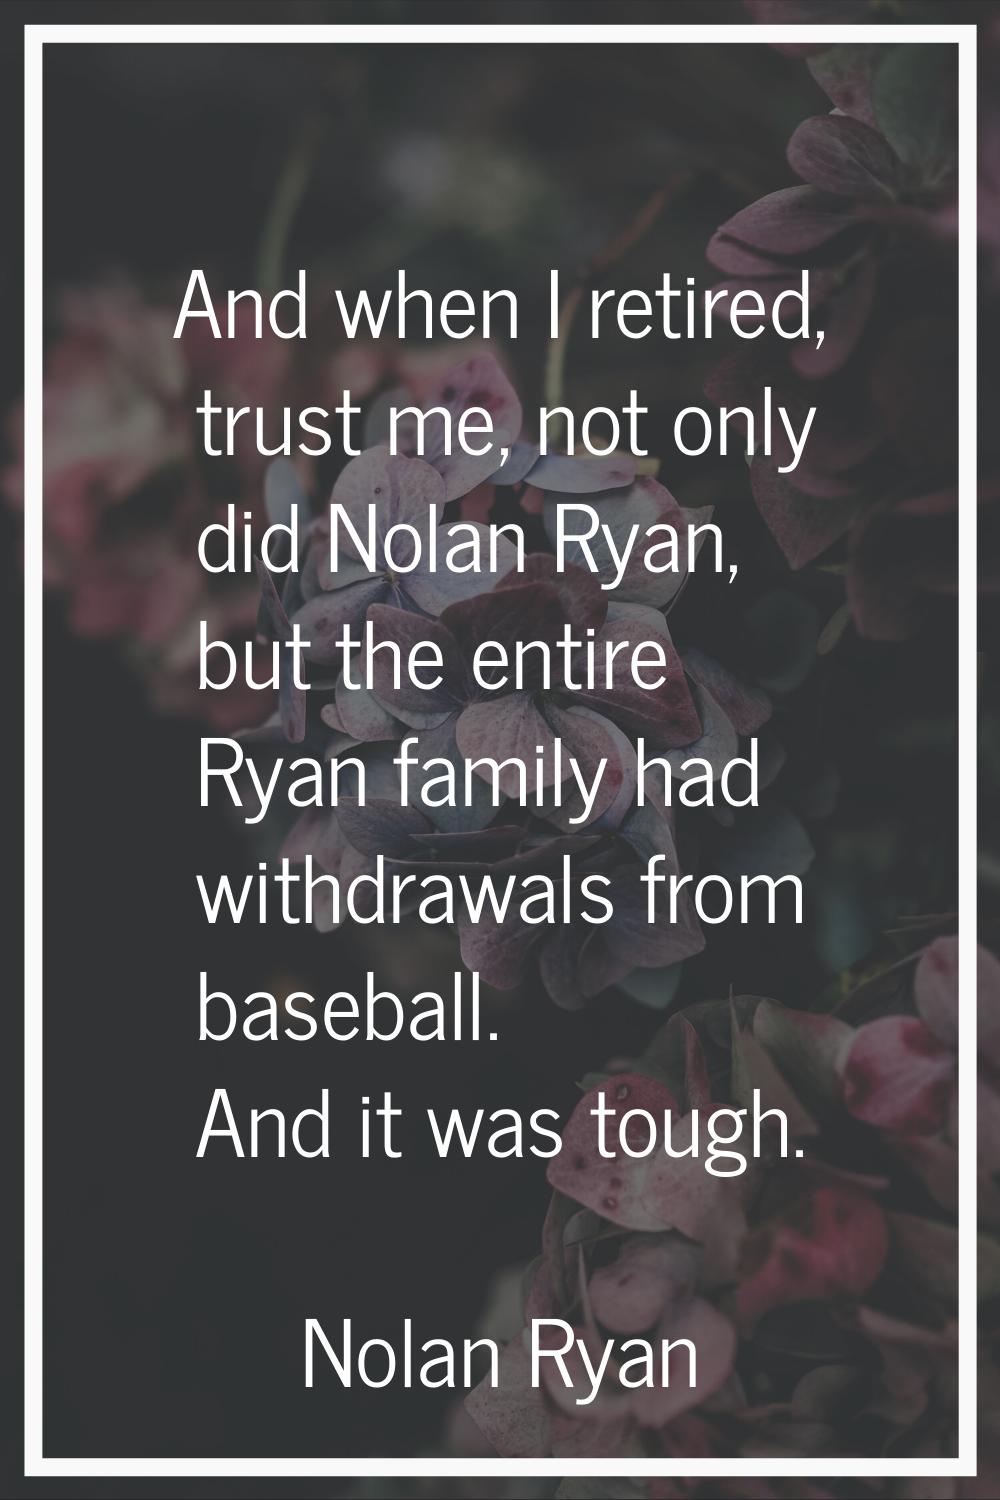 And when I retired, trust me, not only did Nolan Ryan, but the entire Ryan family had withdrawals f